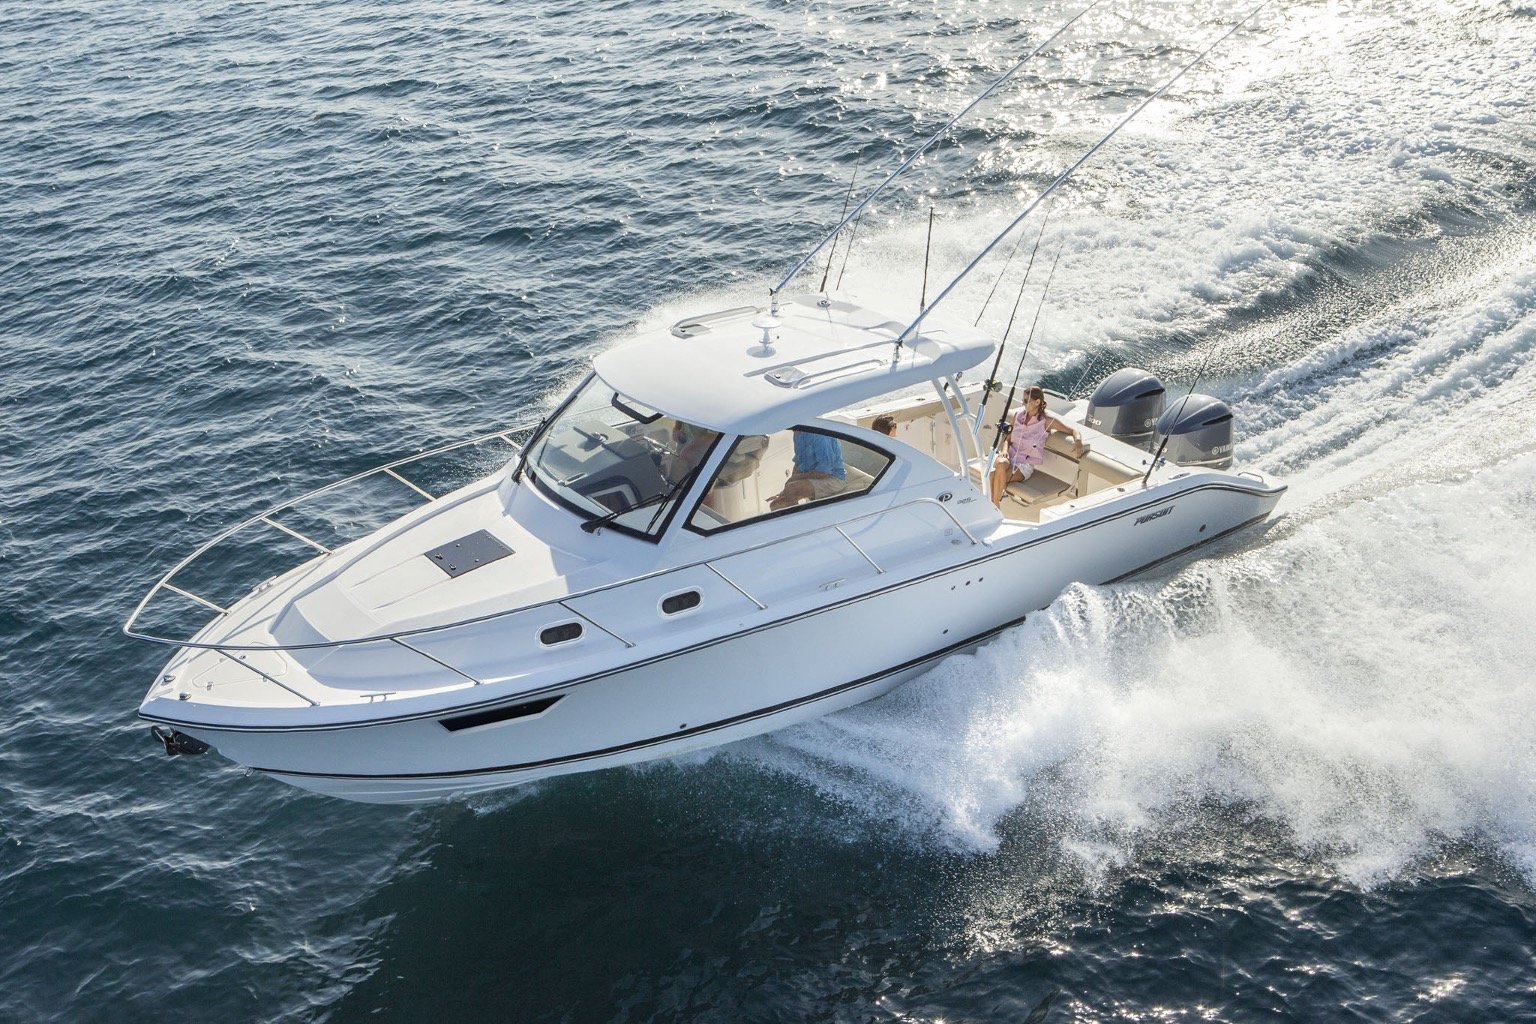 Conquer the open ocean with one of the best offshore fishing boats available today.